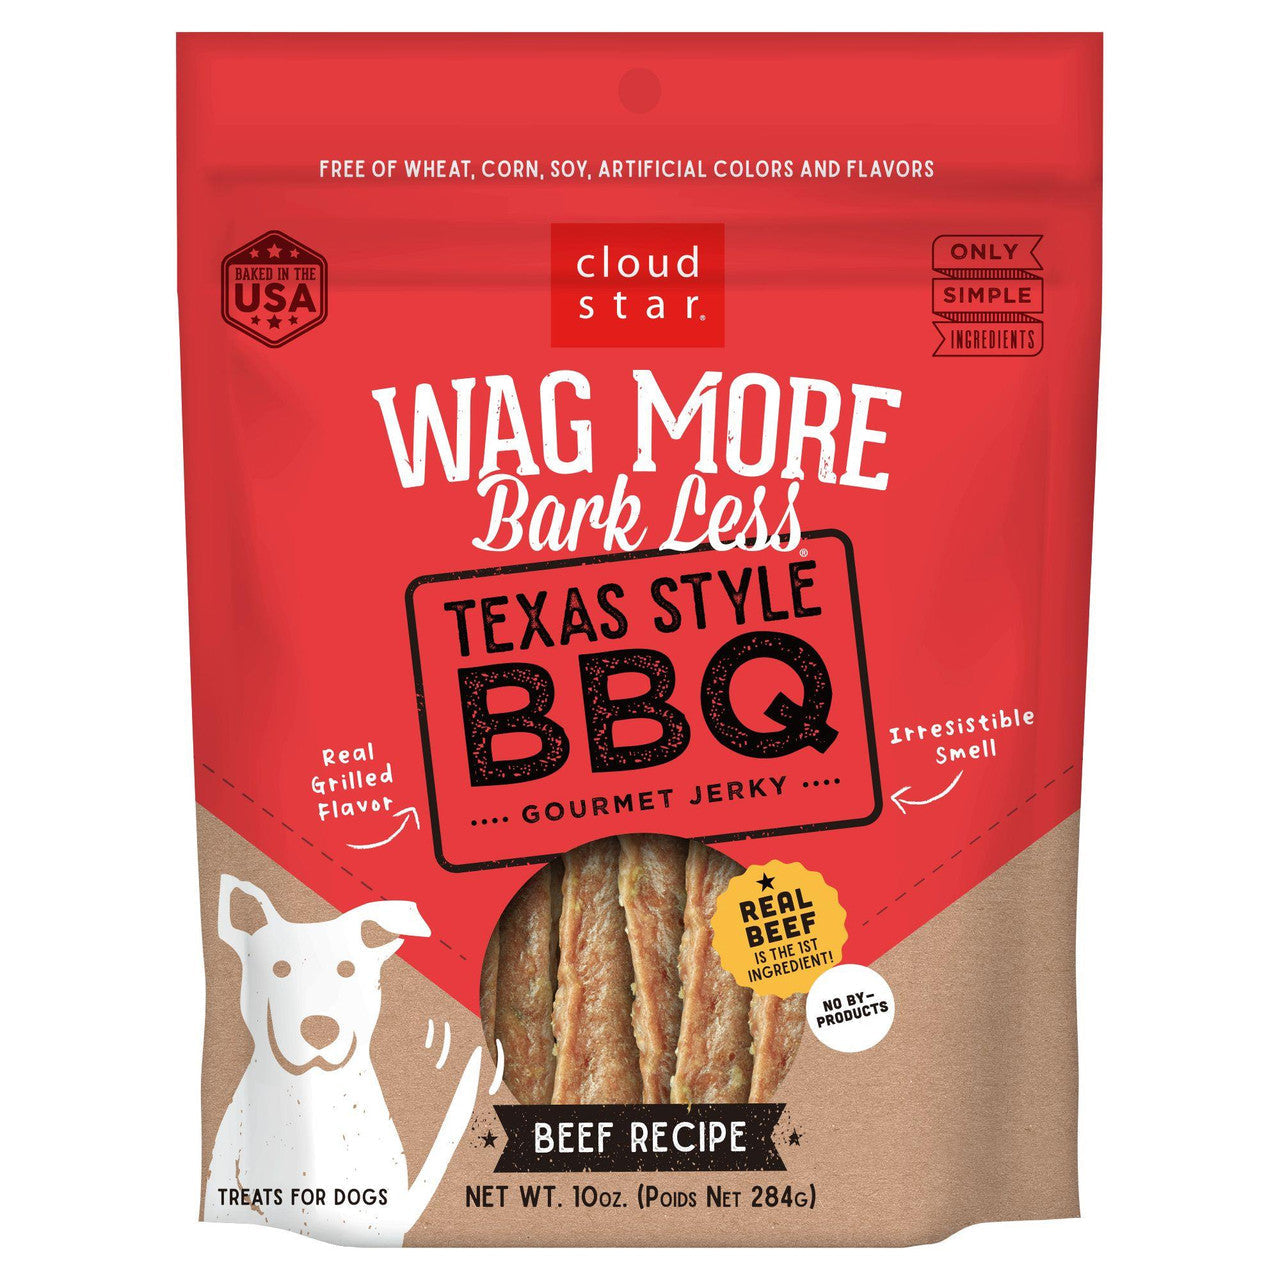 Wag More Bark Less Texas Style BBQ Beef Grilled Jerky 10 oz 693804191243